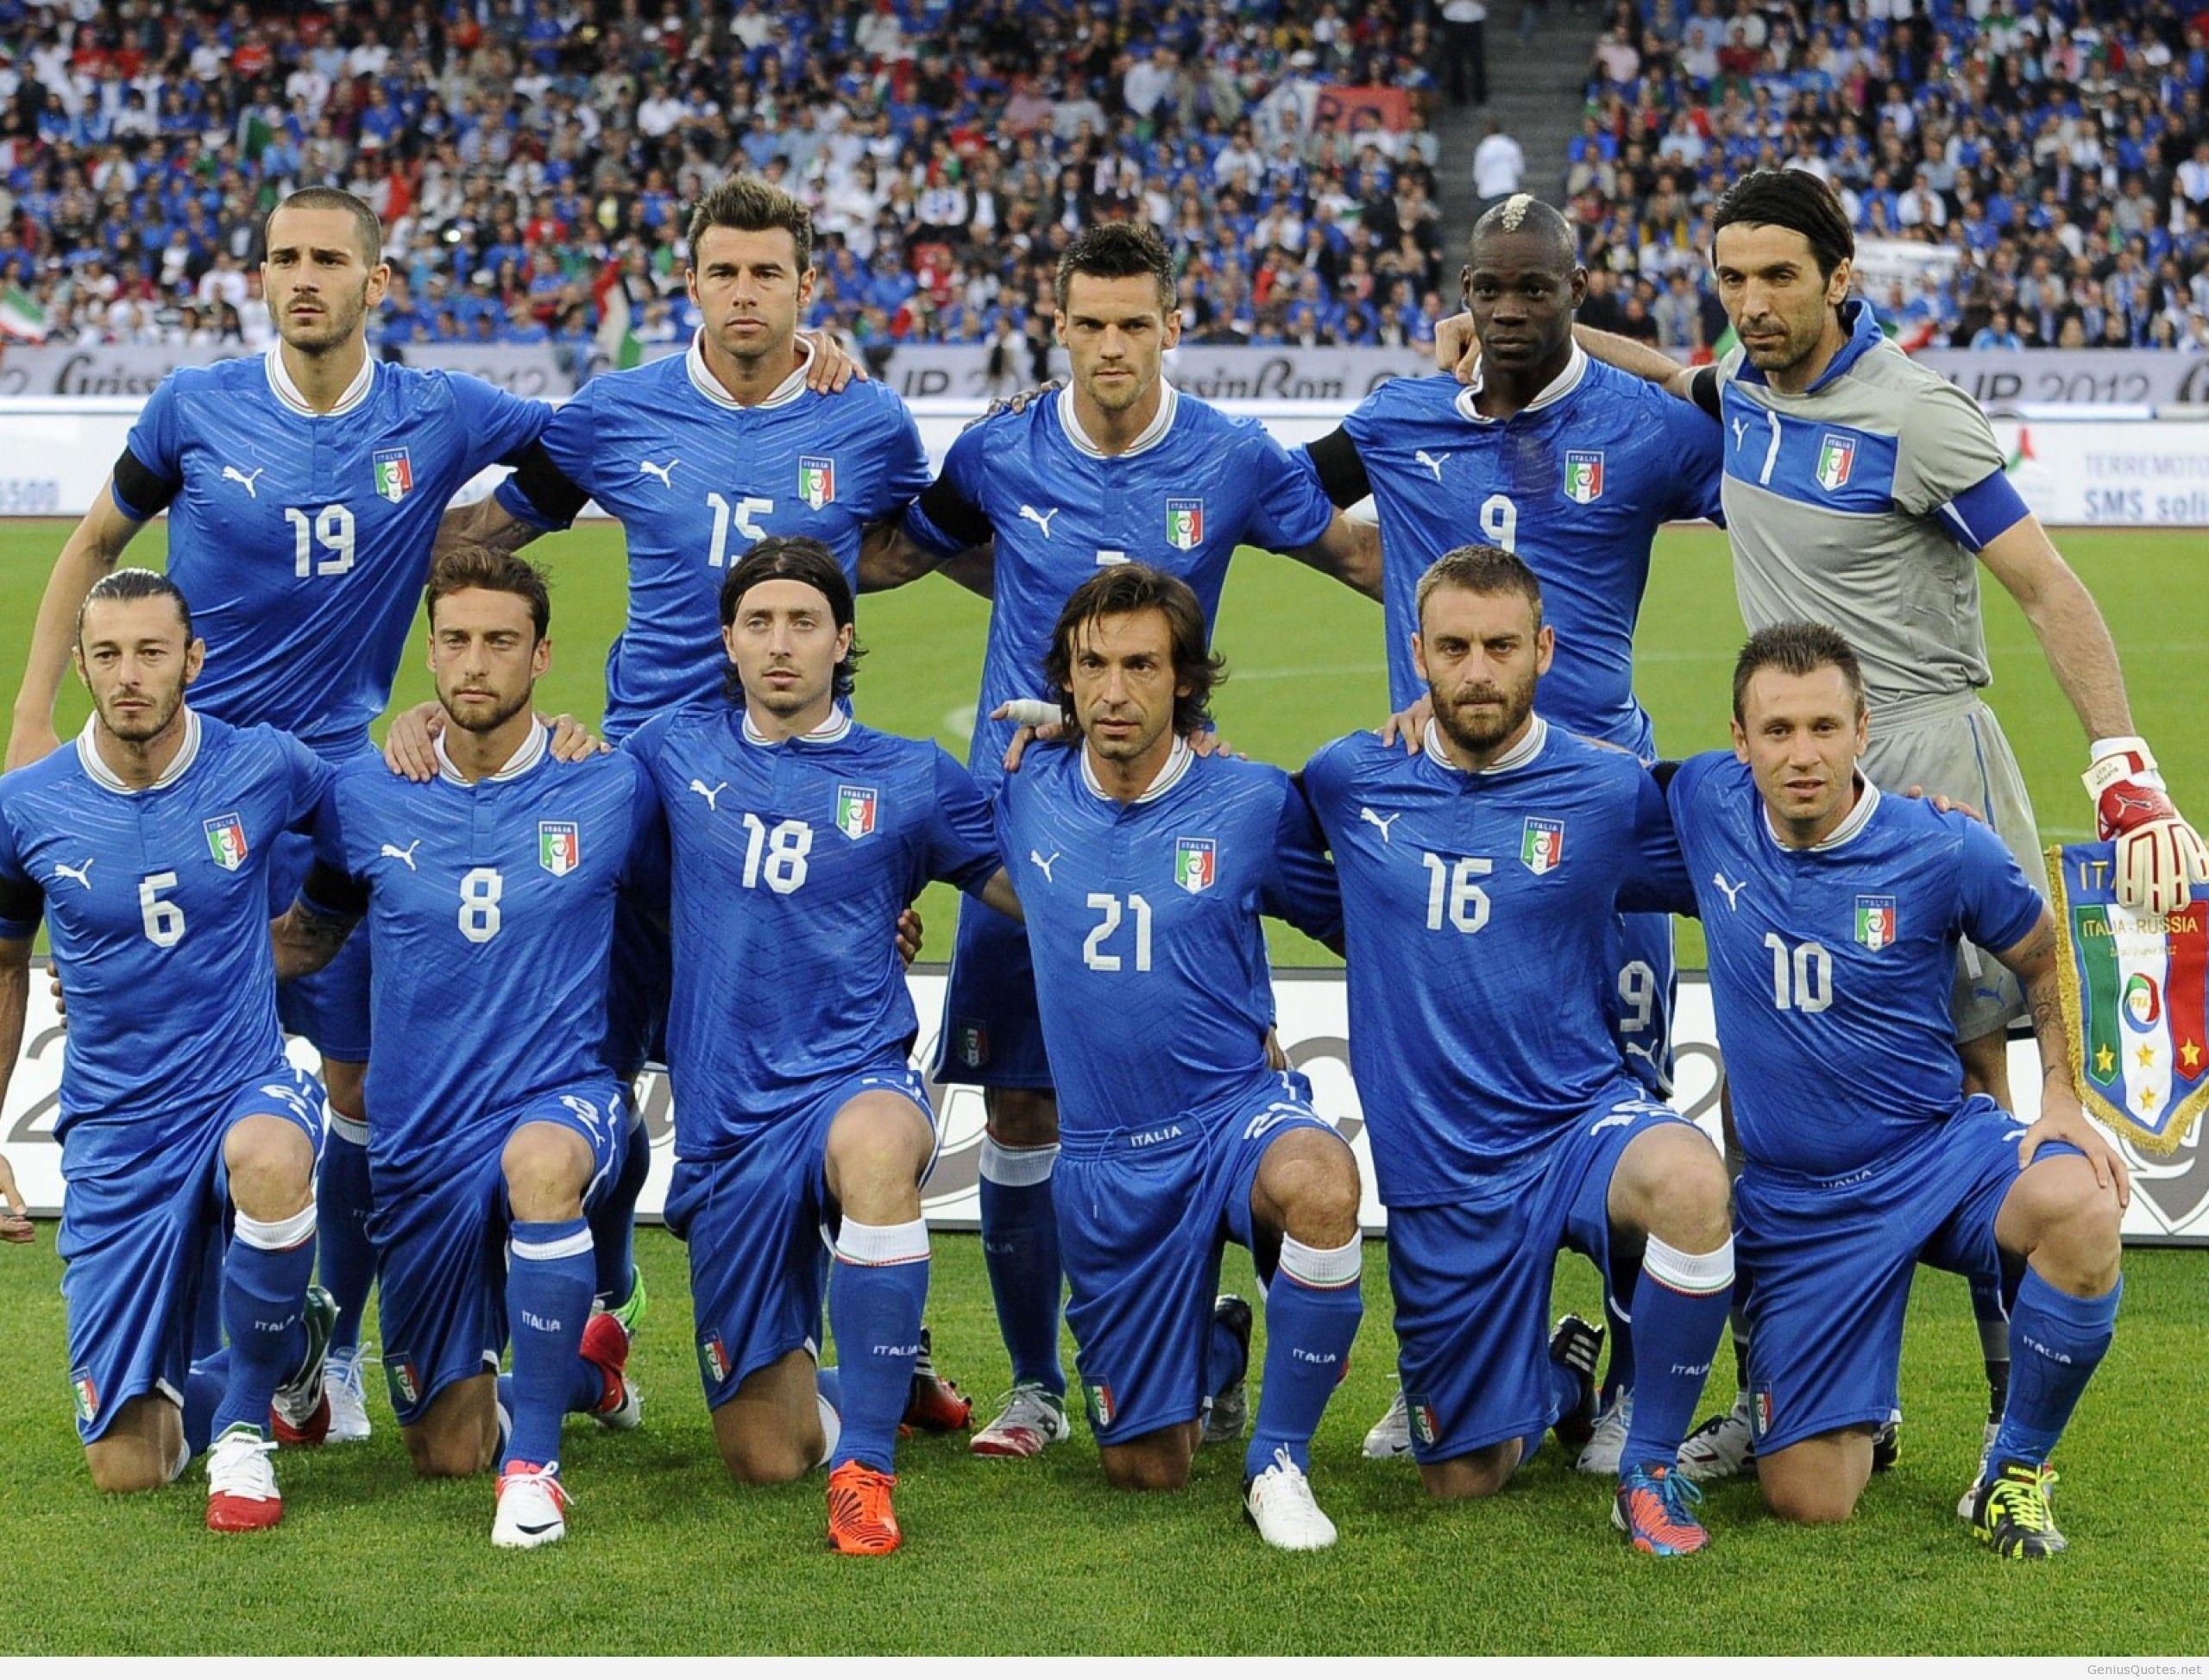 Fifa world cup 2014 italy team wallpaper and photo quote